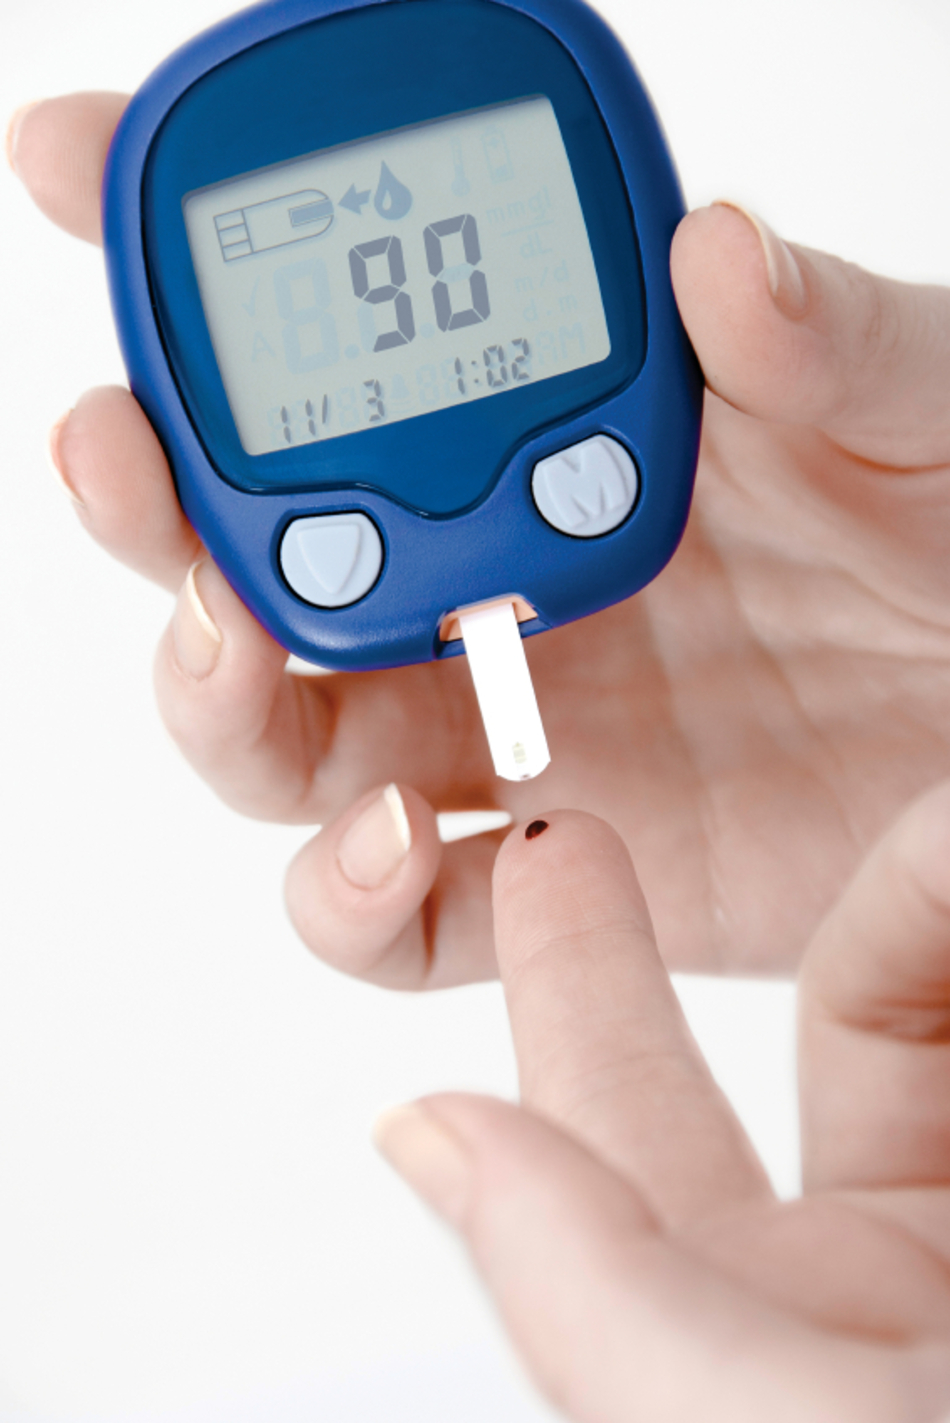 Research to Help Diabetics With Hypoglycemia Unawareness